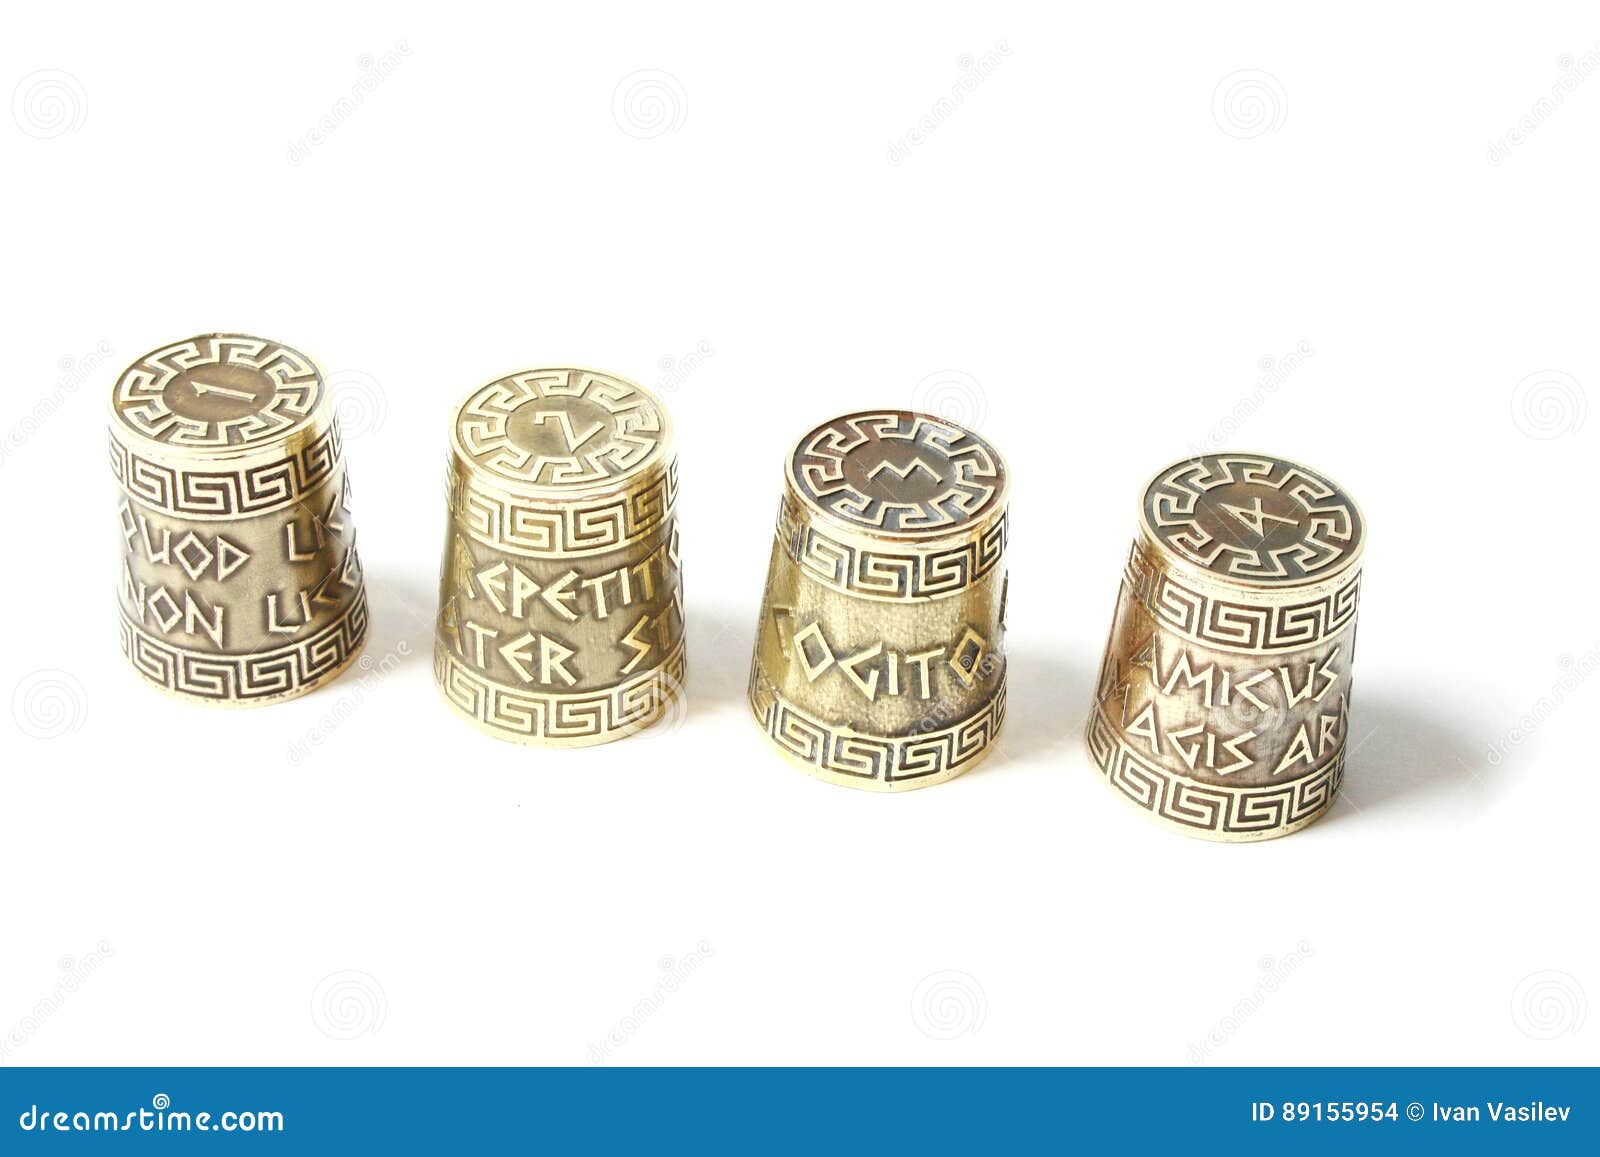 collection set ot four decorative thimbles with etching with greek aphorisms